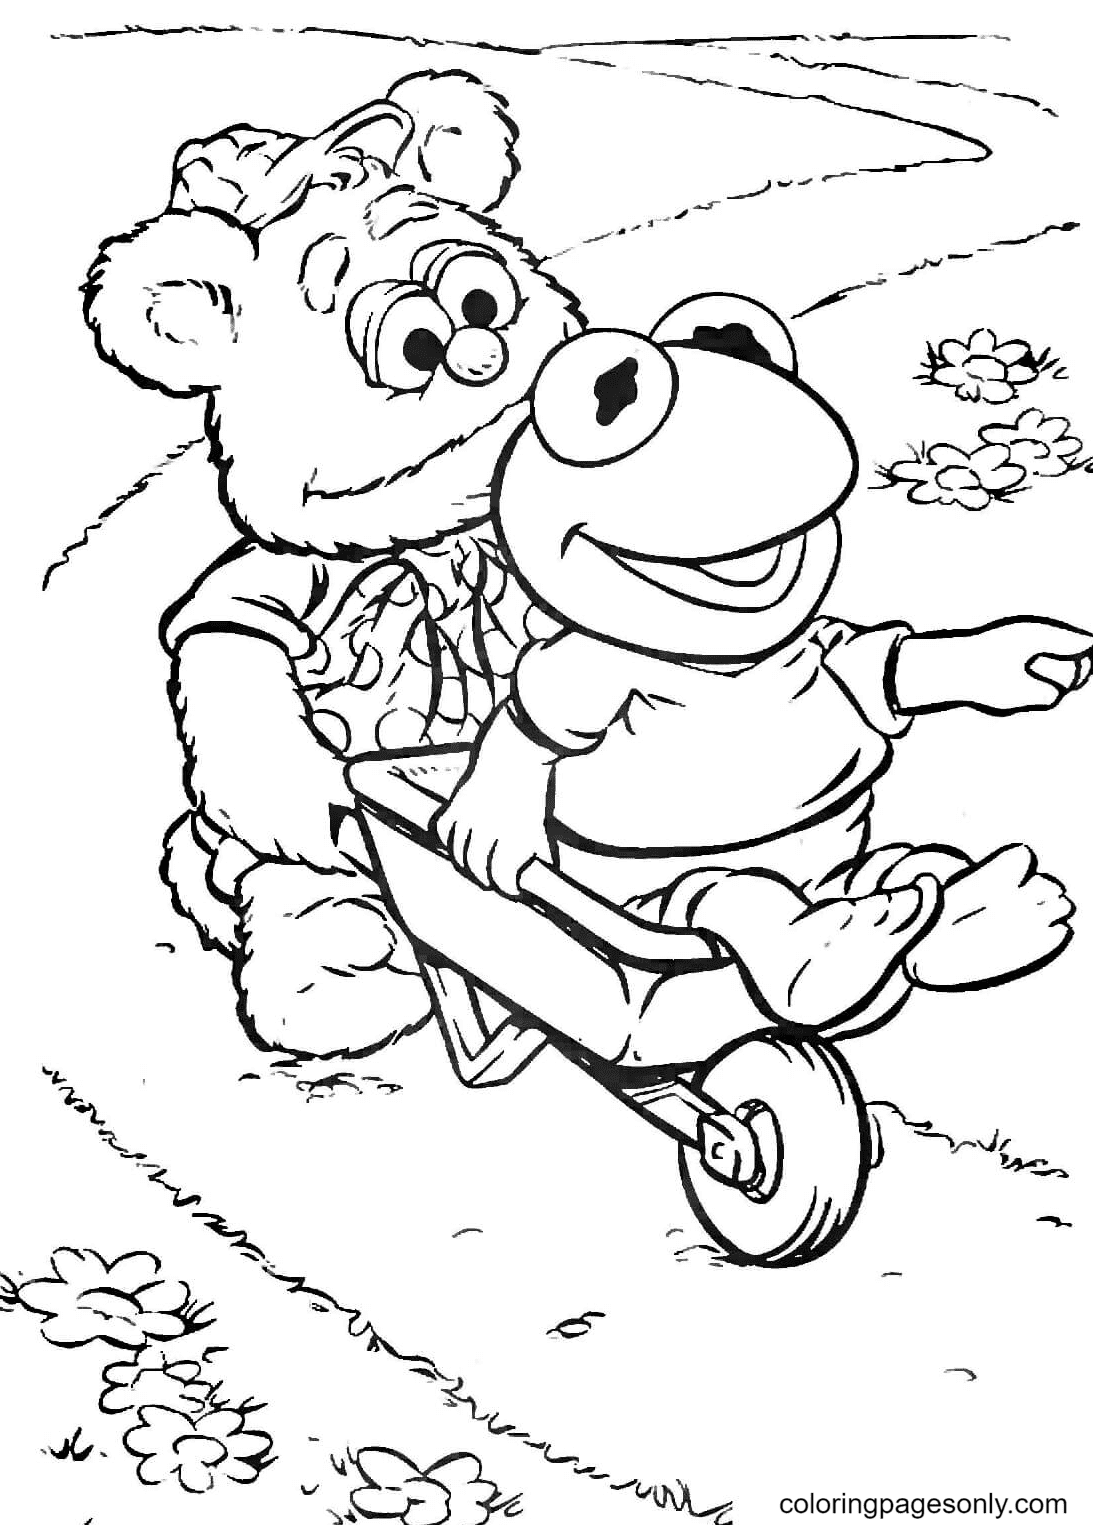 Fozzie and Kermit in a cart Coloring Pages